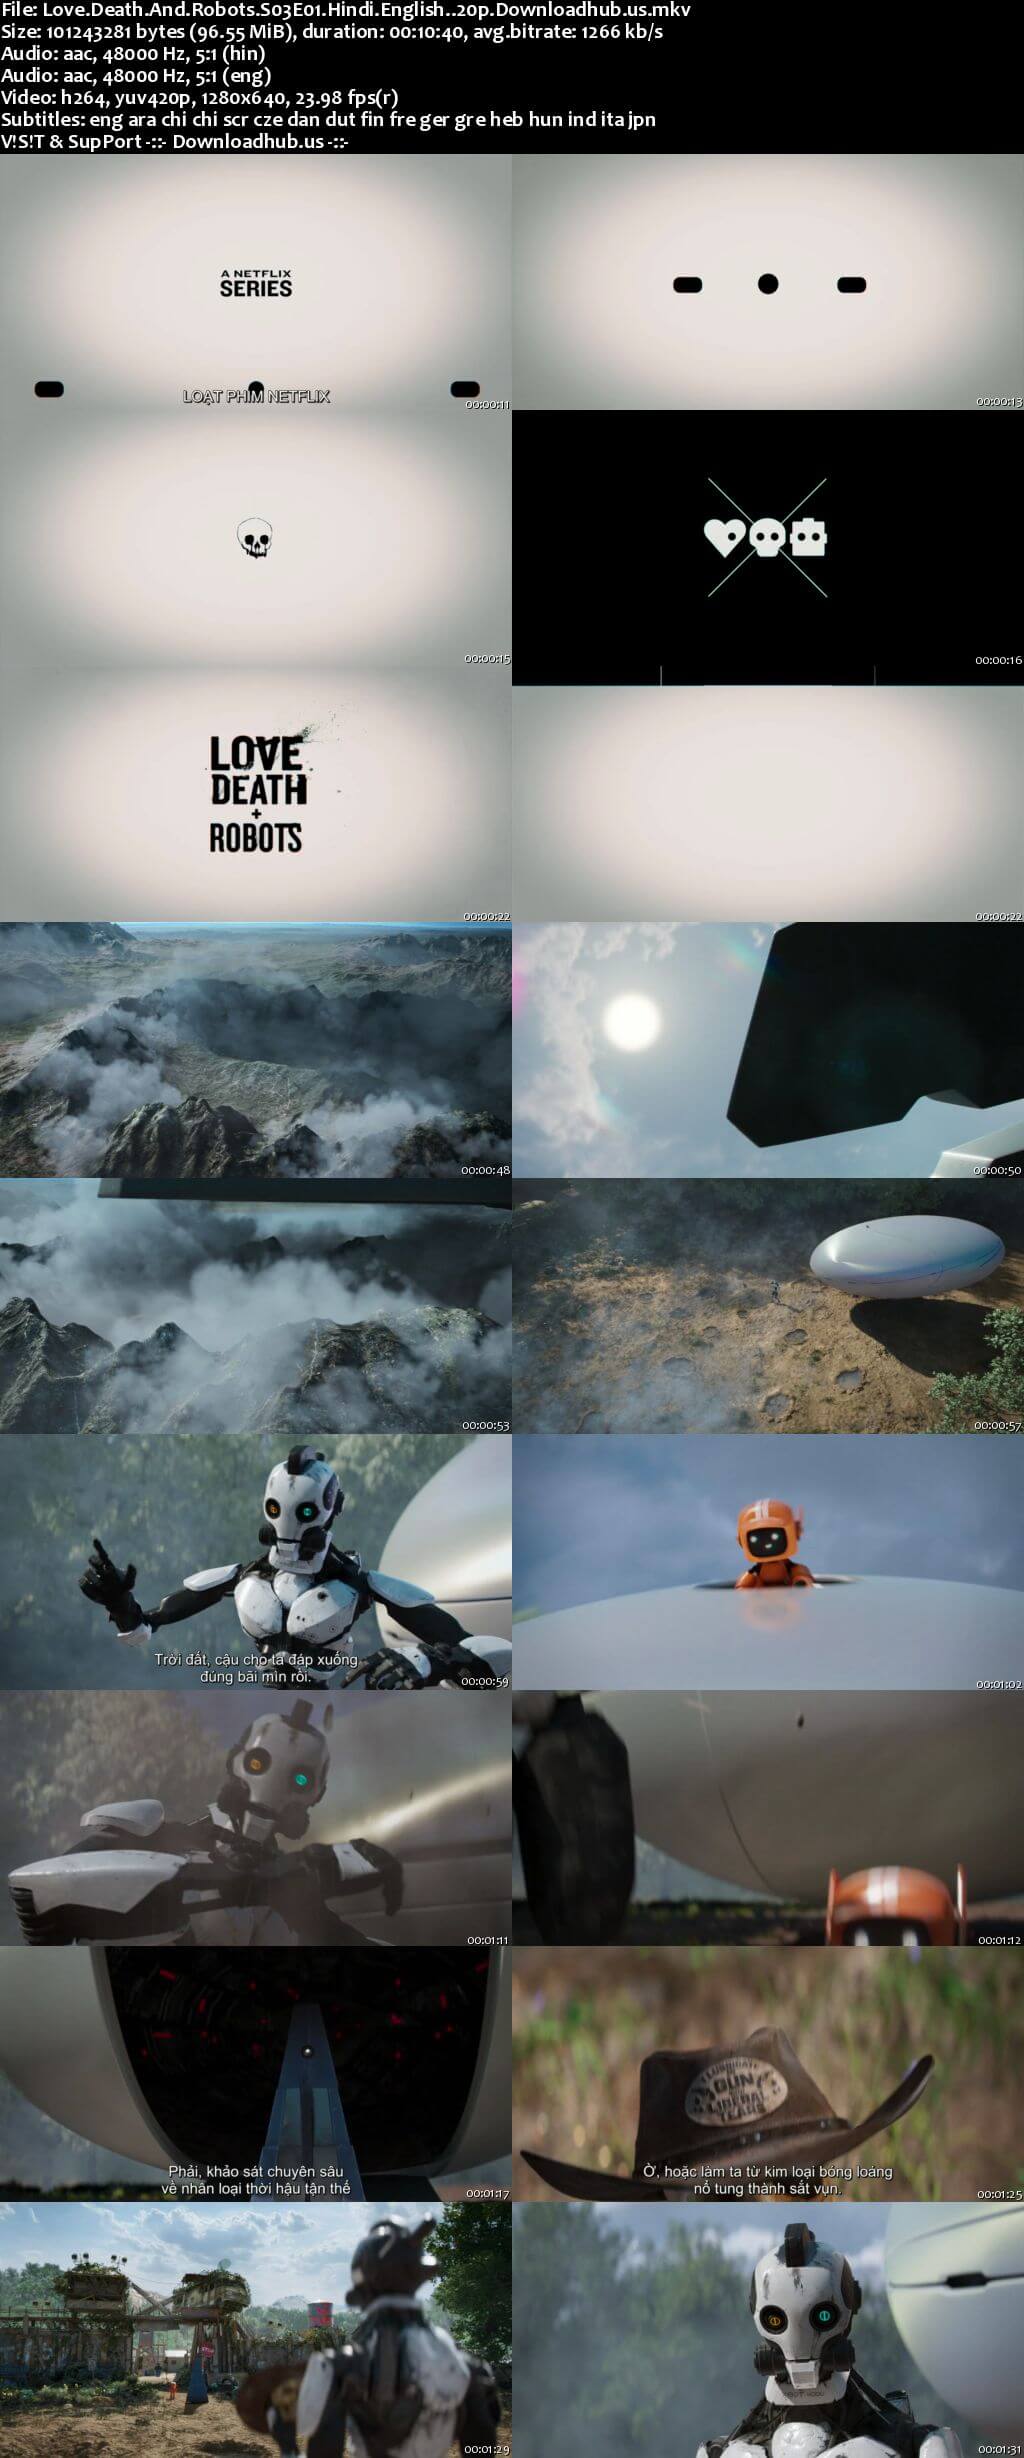 Love, Death And Robots 2022 S03 Complete Hindi Dual Audio 720p Web-DL MSubs